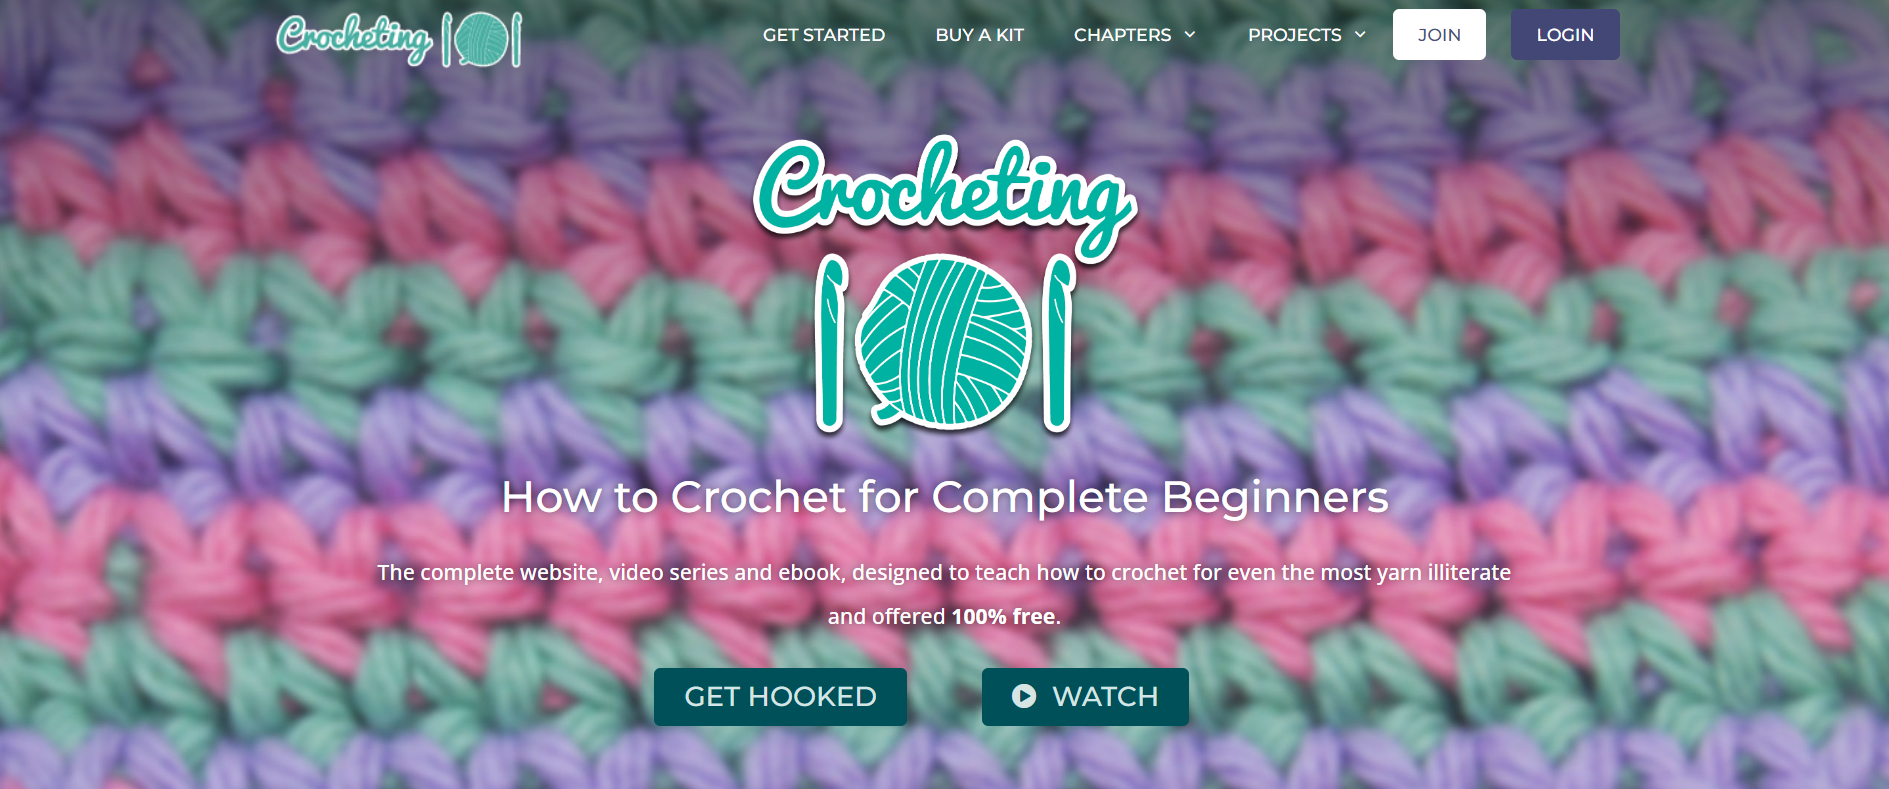 How to Crochet for Complete Beginners - Crocheting101